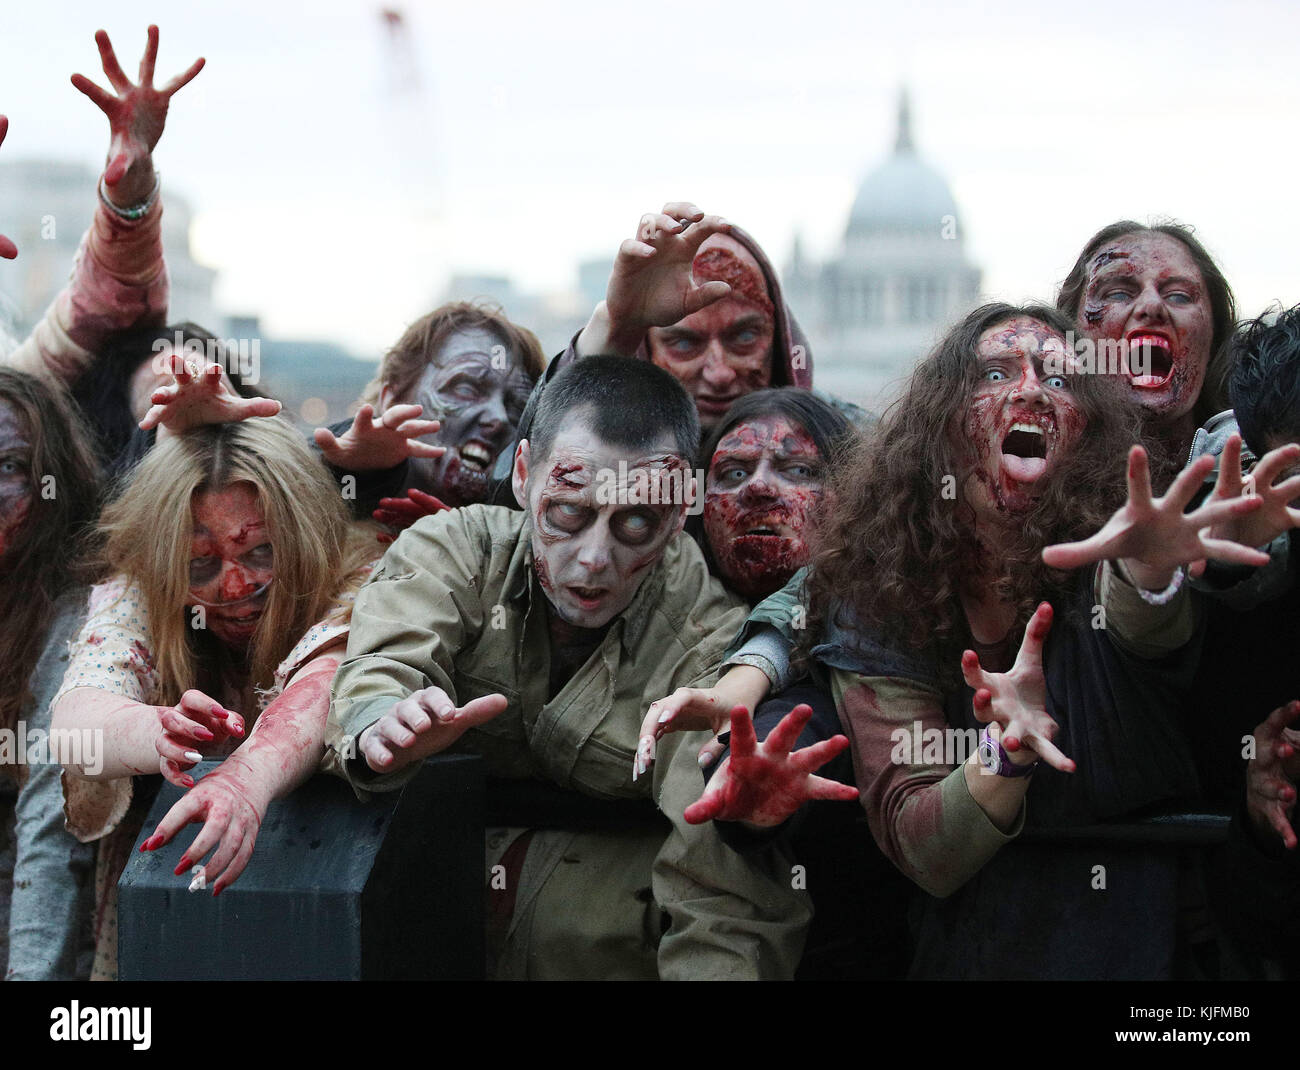 The Walking Dead descend on ‘Walkerloo’ - 100 ‘Walkers’ in gory prosthetics marked the 100th episode of the hit TV show The Walking Dead, which premieres on Fox tonight at 9pm. After eight hours in make-up, the 100 fanatics walked from the Southbank and over Waterloo Bridge before converging on the London underground, shocking commuters in their path.  Where: London, United Kingdom When: 23 Oct 2017 Credit: Joe Pepler/PinPep/WENN.com Stock Photo